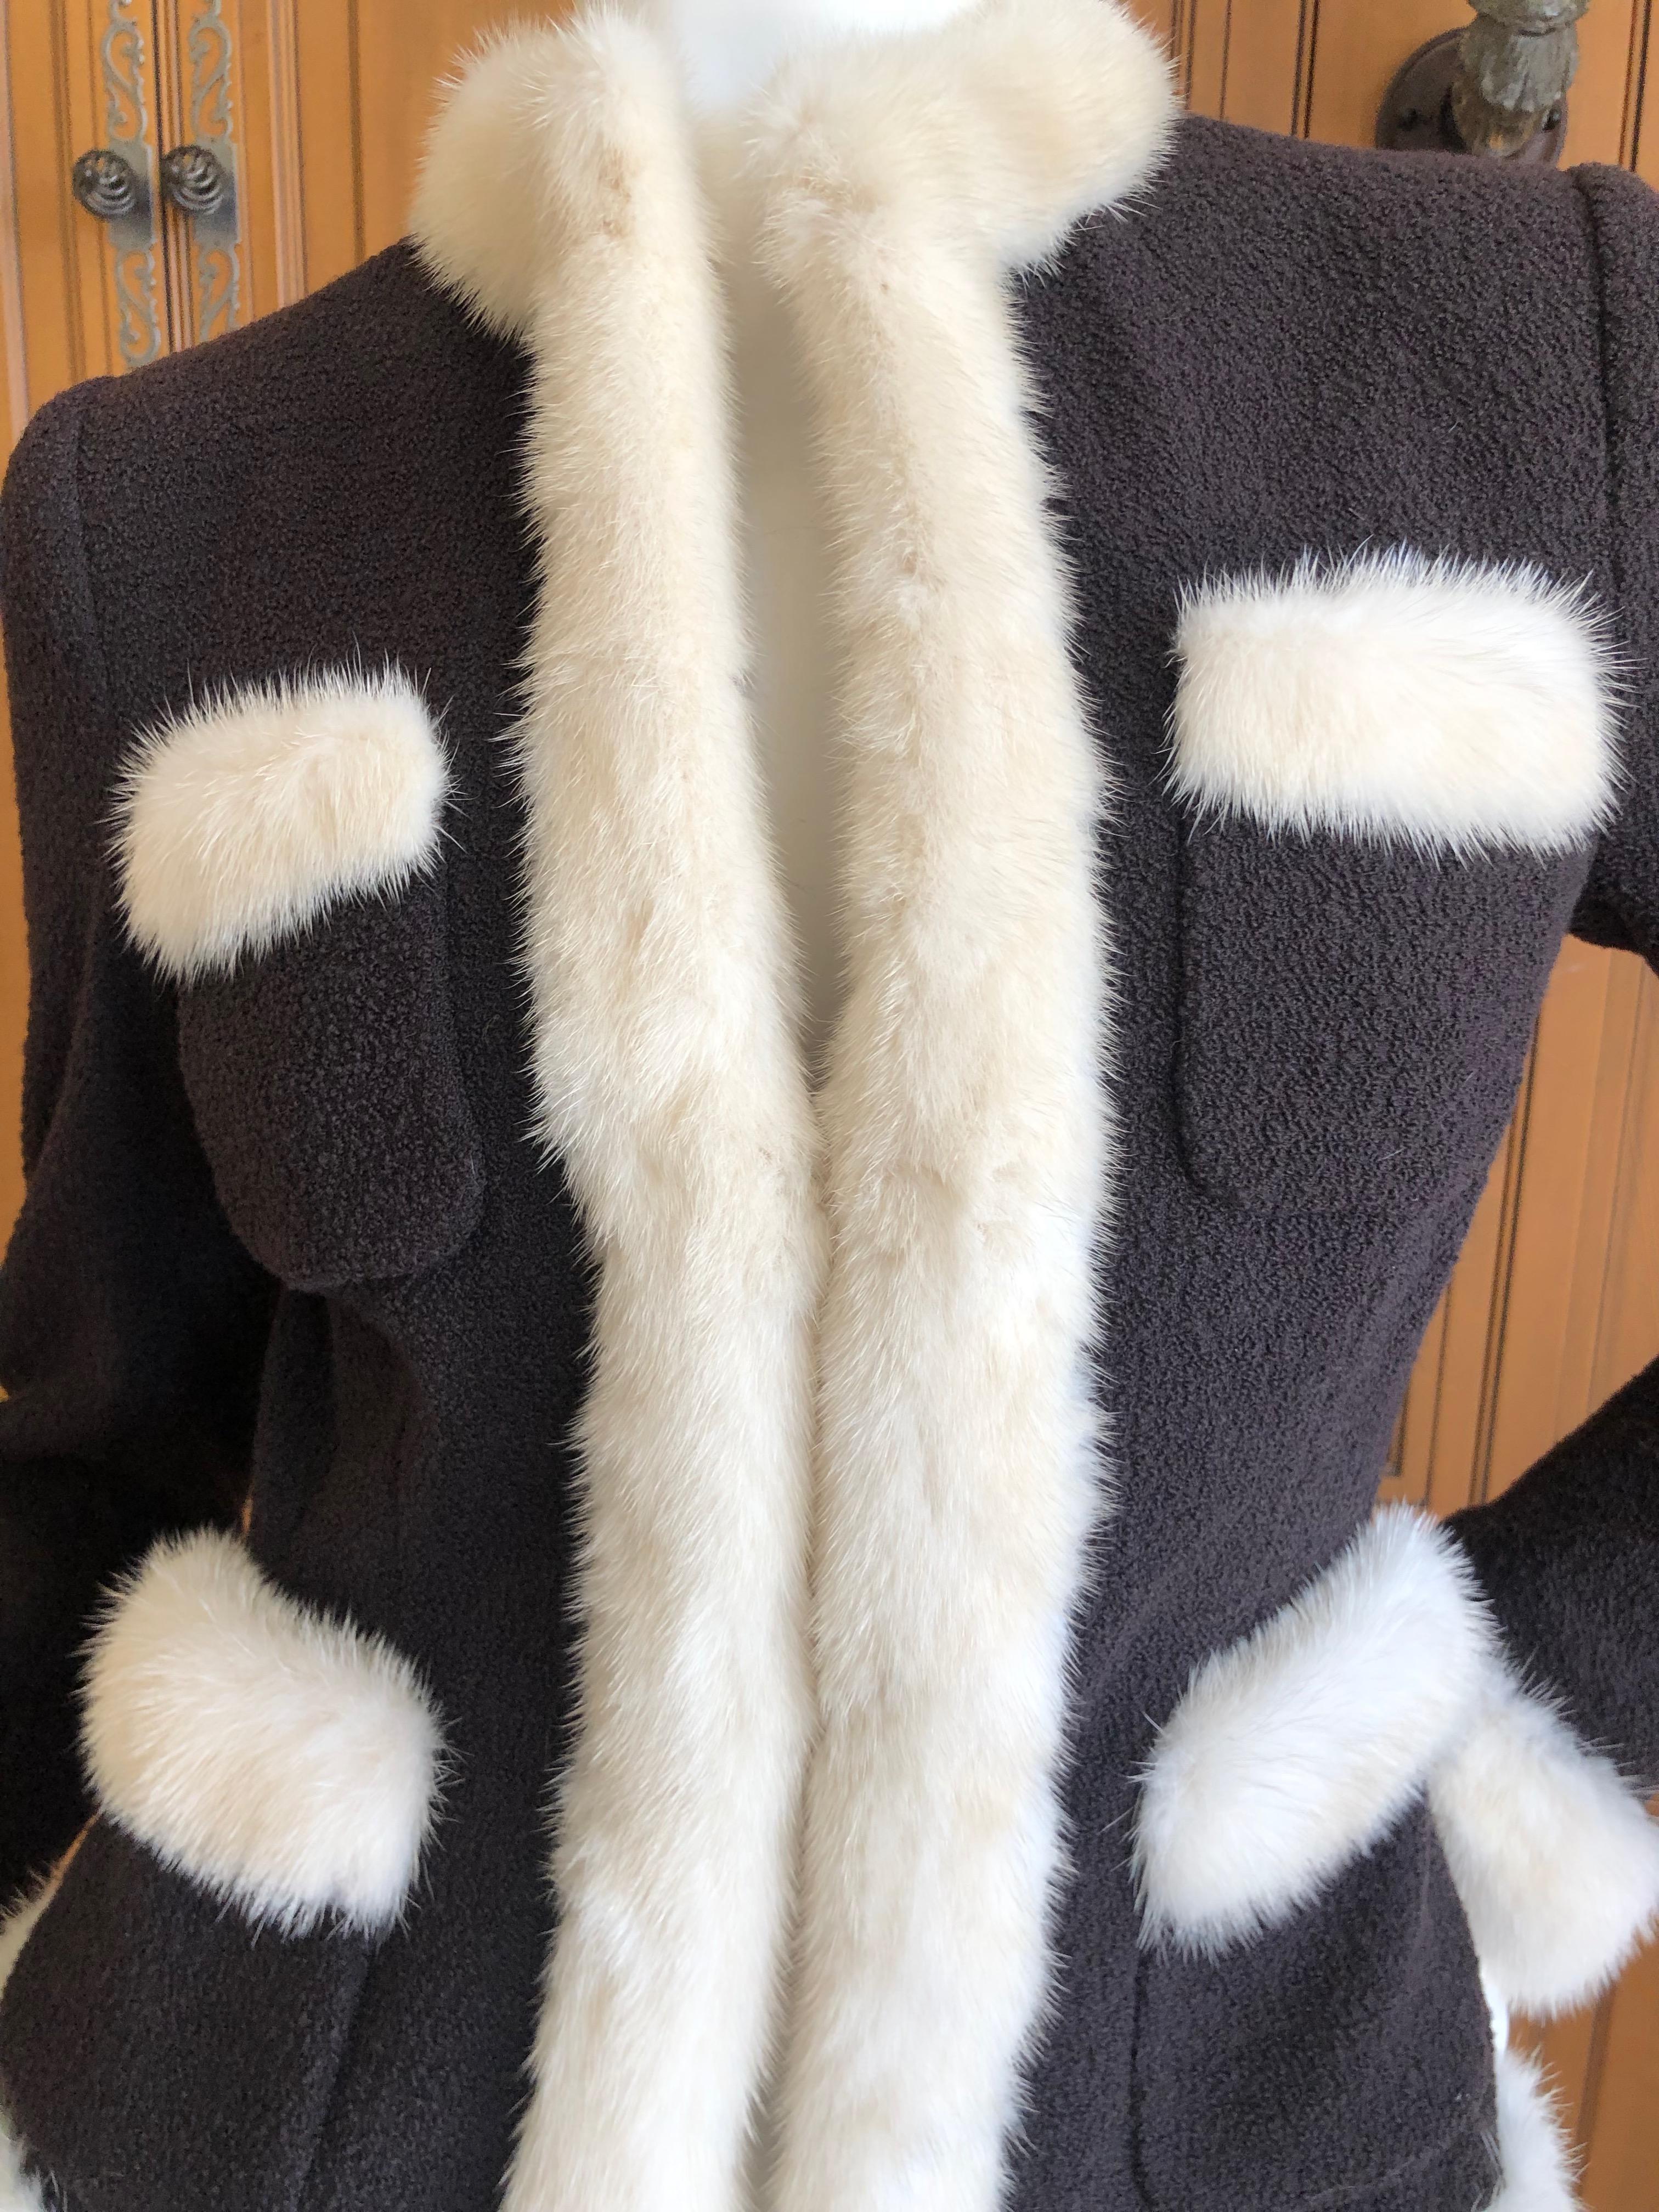 Moschino Vintage Black Boucle Jacket with Mink Fur Trim.
Ivory mink trim on the cuffs, hem and pockets, so chic.
Size 8 US
Bust 36